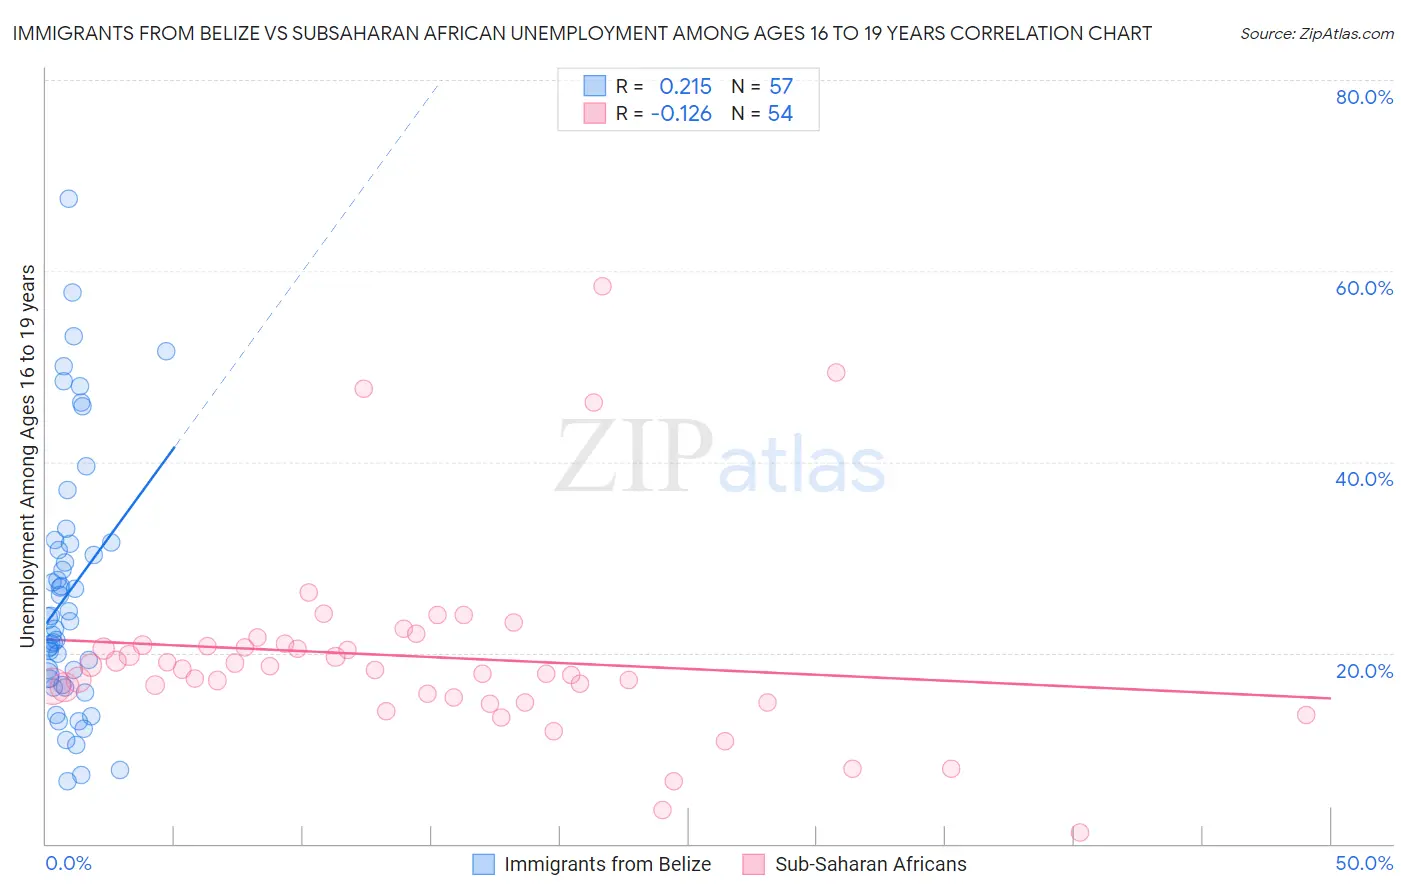 Immigrants from Belize vs Subsaharan African Unemployment Among Ages 16 to 19 years